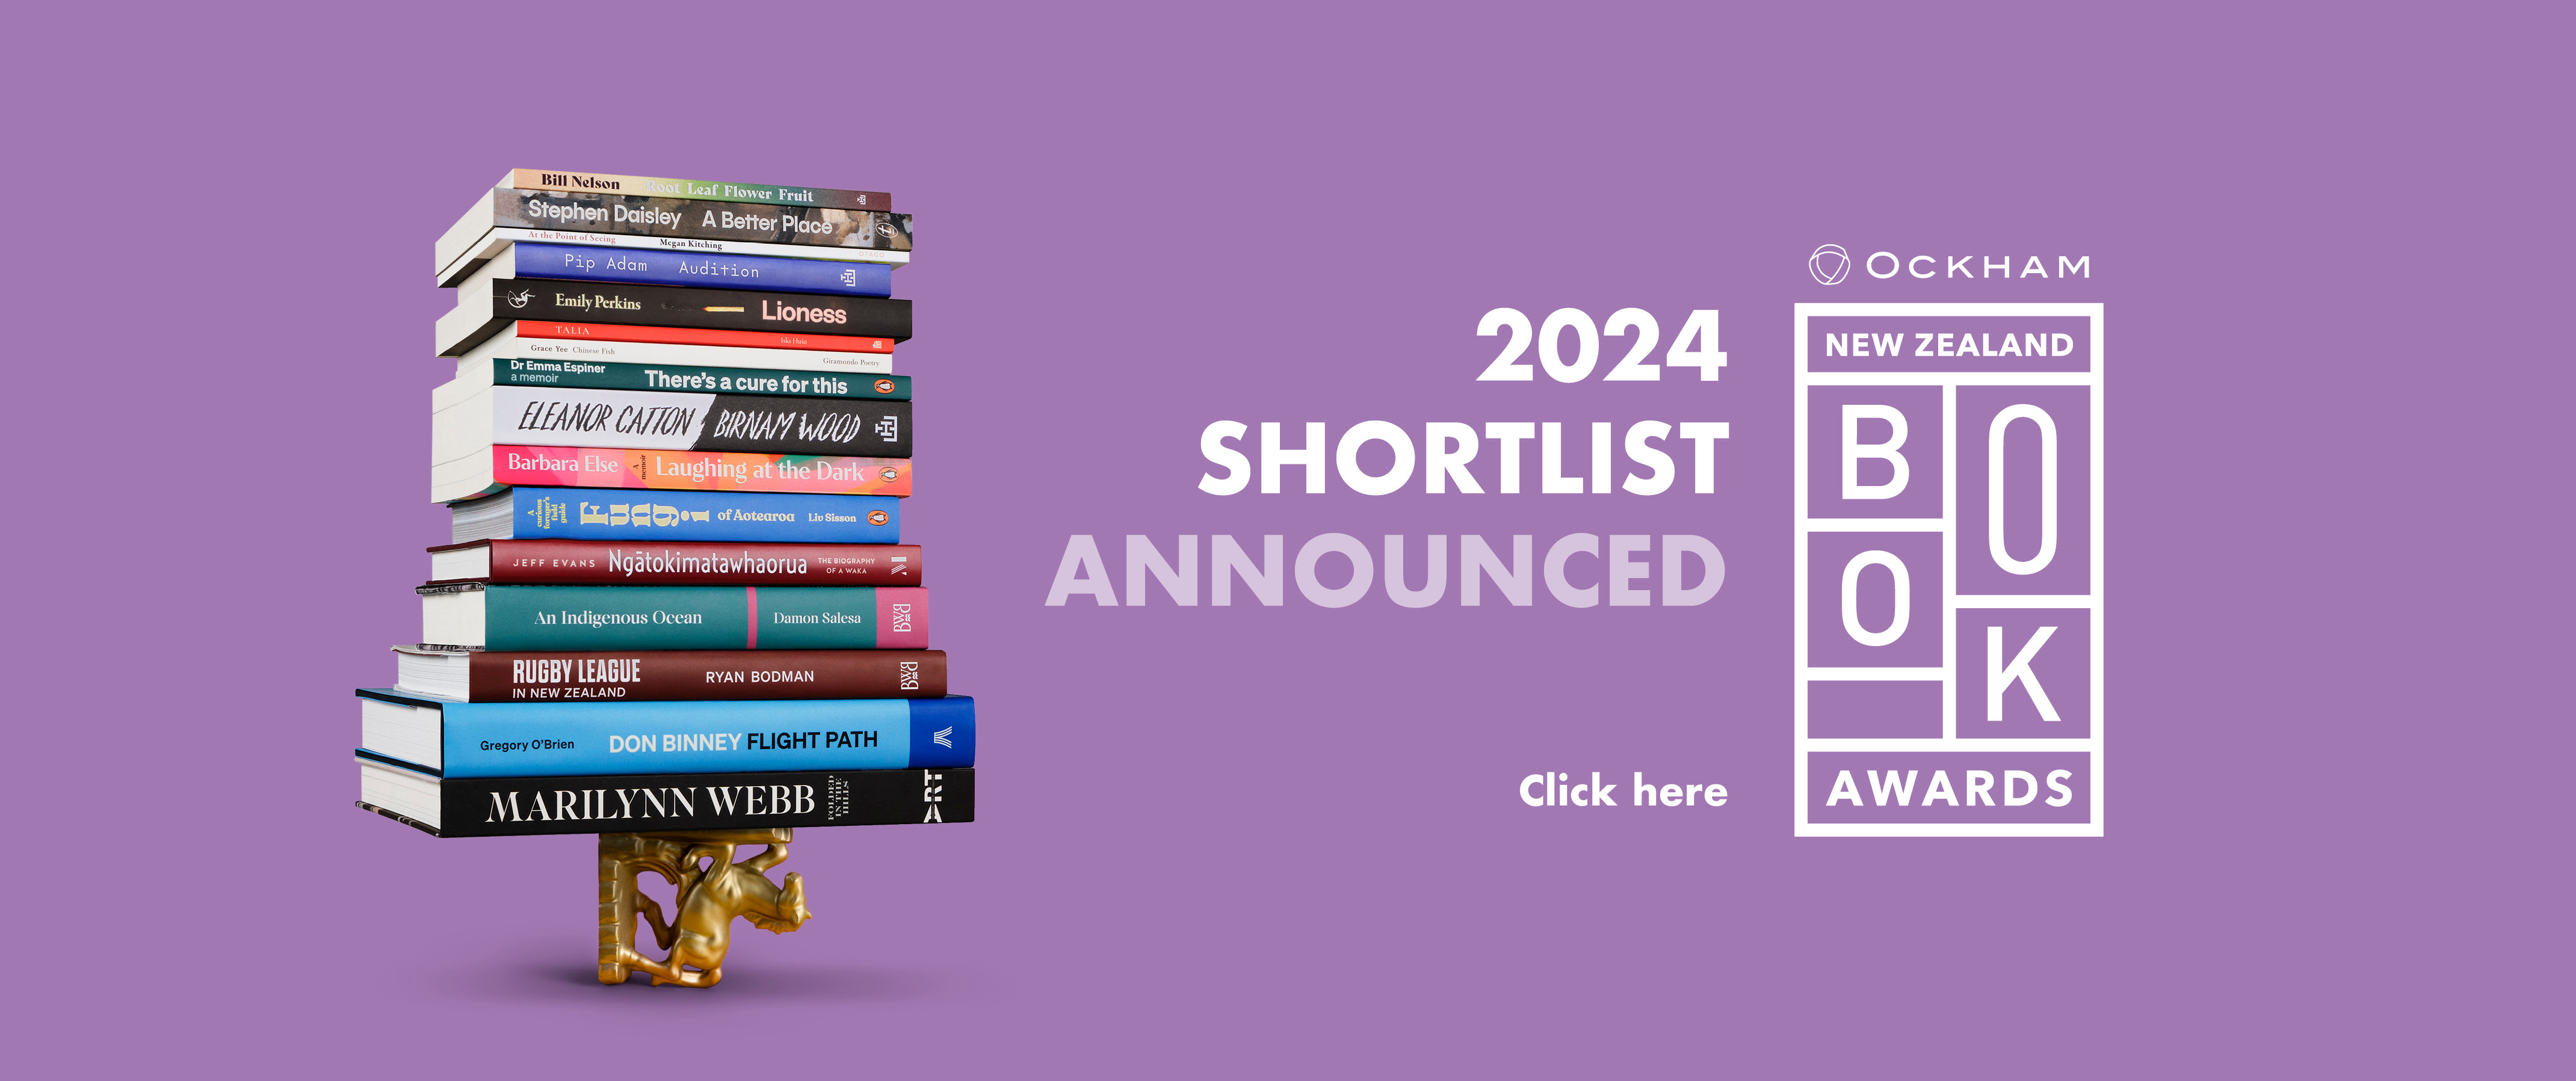 2024 Shortlist announced - Click here